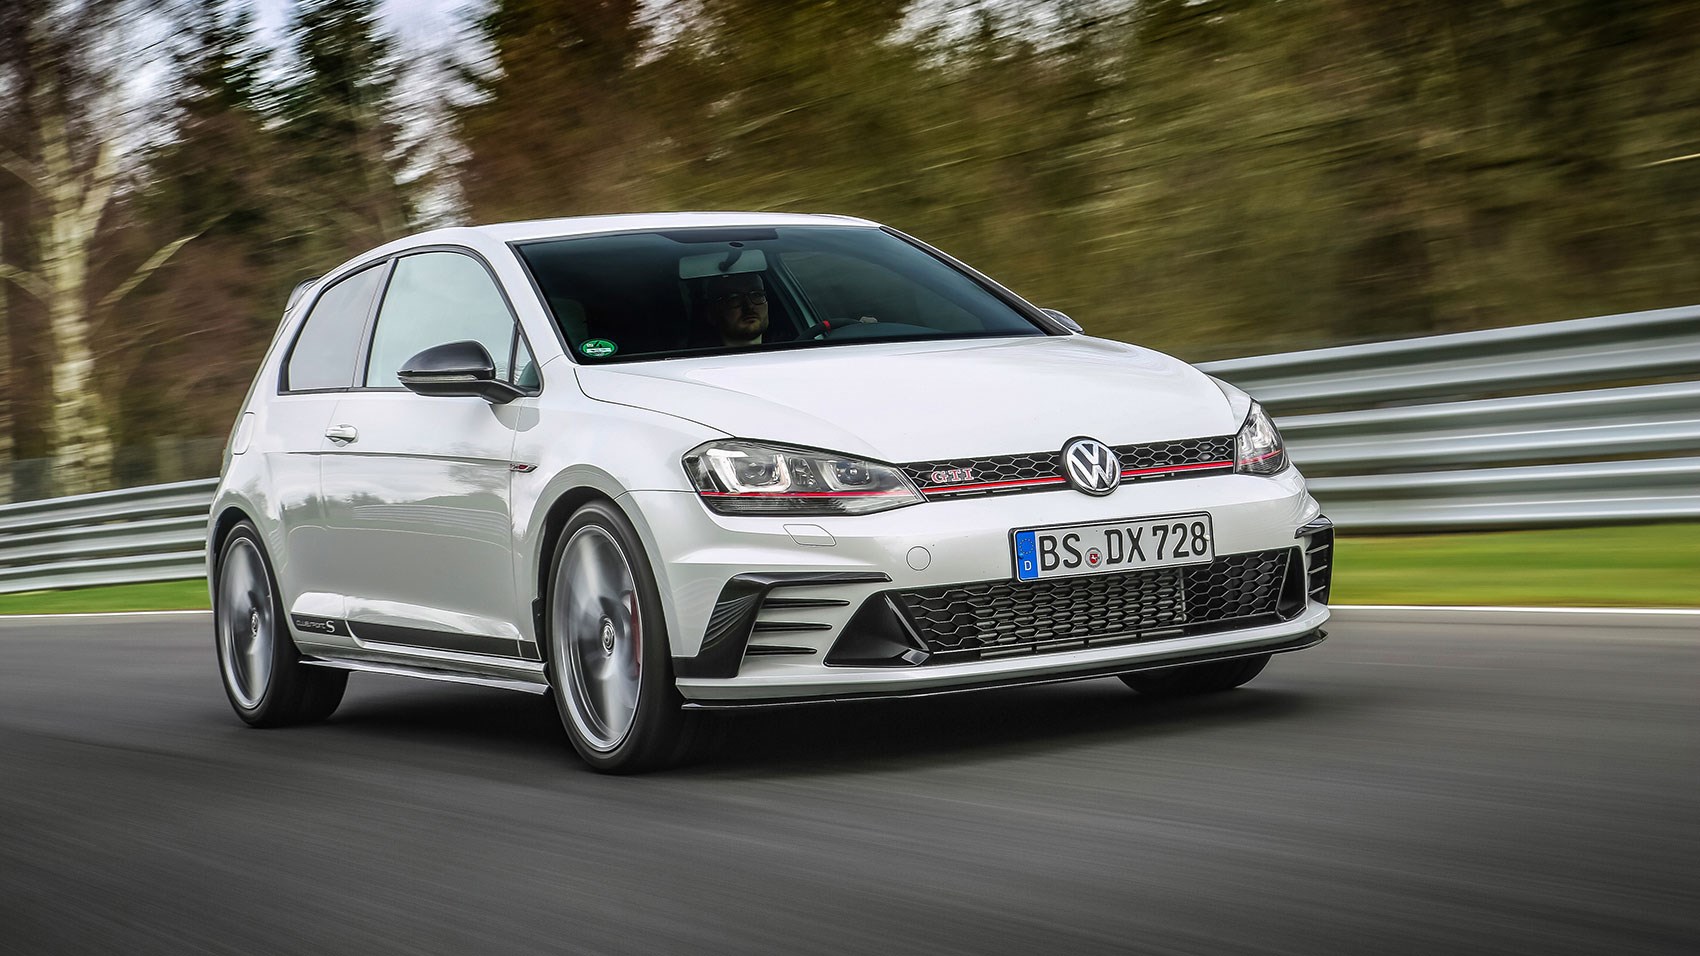 VW Golf GTI Clubsport S (2016) review | CAR Magazine